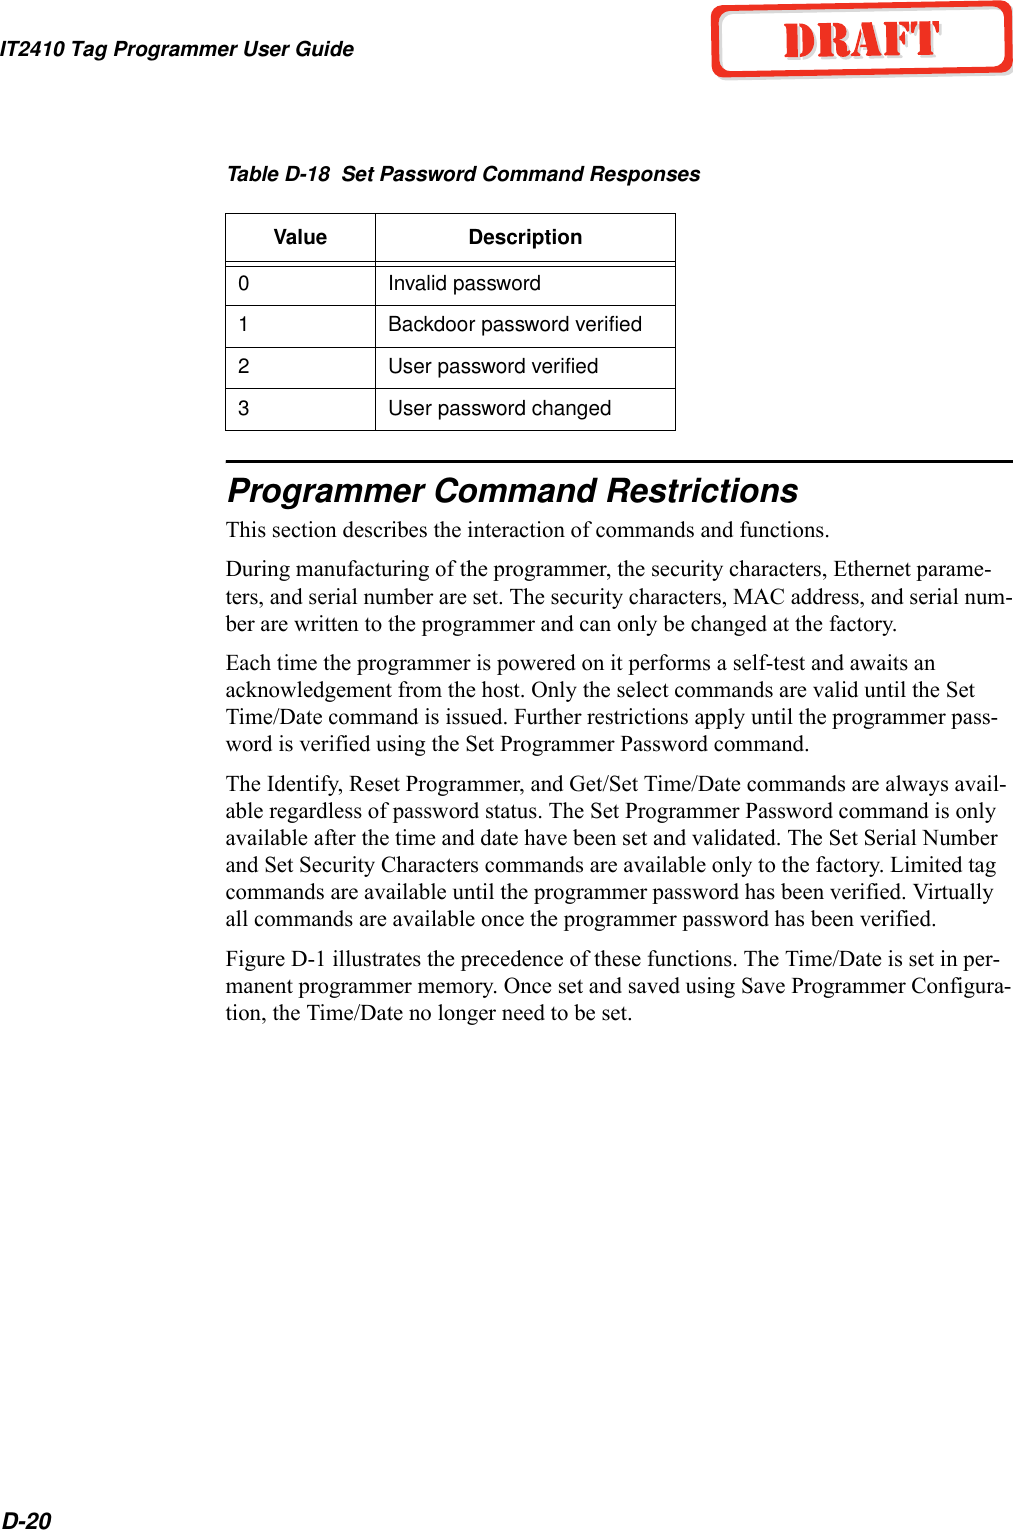 IT2410 Tag Programmer User GuideD-20Table D-18  Set Password Command ResponsesProgrammer Command RestrictionsThis section describes the interaction of commands and functions.During manufacturing of the programmer, the security characters, Ethernet parame-ters, and serial number are set. The security characters, MAC address, and serial num-ber are written to the programmer and can only be changed at the factory.Each time the programmer is powered on it performs a self-test and awaits an acknowledgement from the host. Only the select commands are valid until the Set Time/Date command is issued. Further restrictions apply until the programmer pass-word is verified using the Set Programmer Password command.The Identify, Reset Programmer, and Get/Set Time/Date commands are always avail-able regardless of password status. The Set Programmer Password command is only available after the time and date have been set and validated. The Set Serial Number and Set Security Characters commands are available only to the factory. Limited tag commands are available until the programmer password has been verified. Virtually all commands are available once the programmer password has been verified.Figure D-1 illustrates the precedence of these functions. The Time/Date is set in per-manent programmer memory. Once set and saved using Save Programmer Configura-tion, the Time/Date no longer need to be set.Value Description0Invalid password1Backdoor password verified2User password verified3User password changed